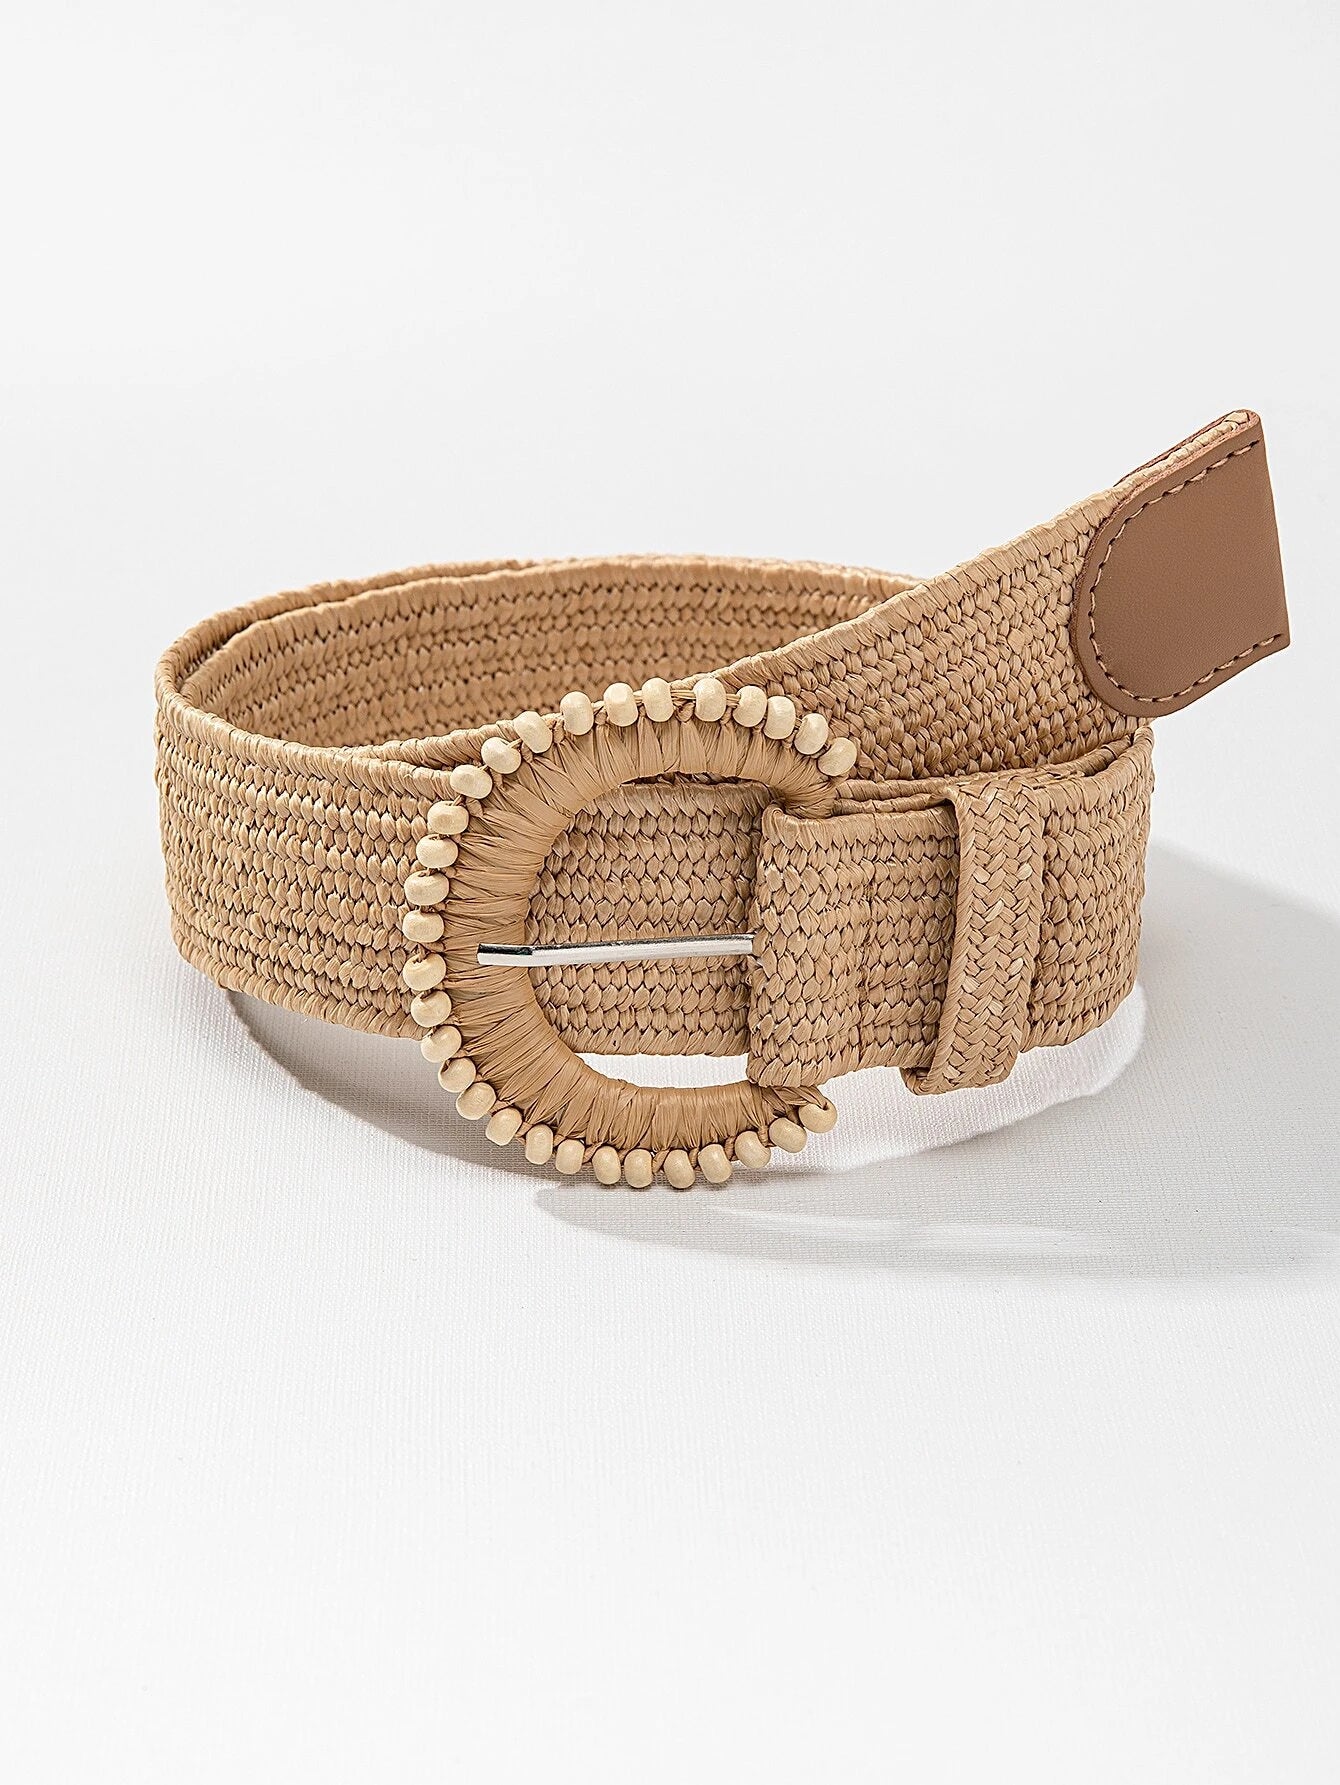 woven straw belt with leather on the end and beads on the edge of the buckle